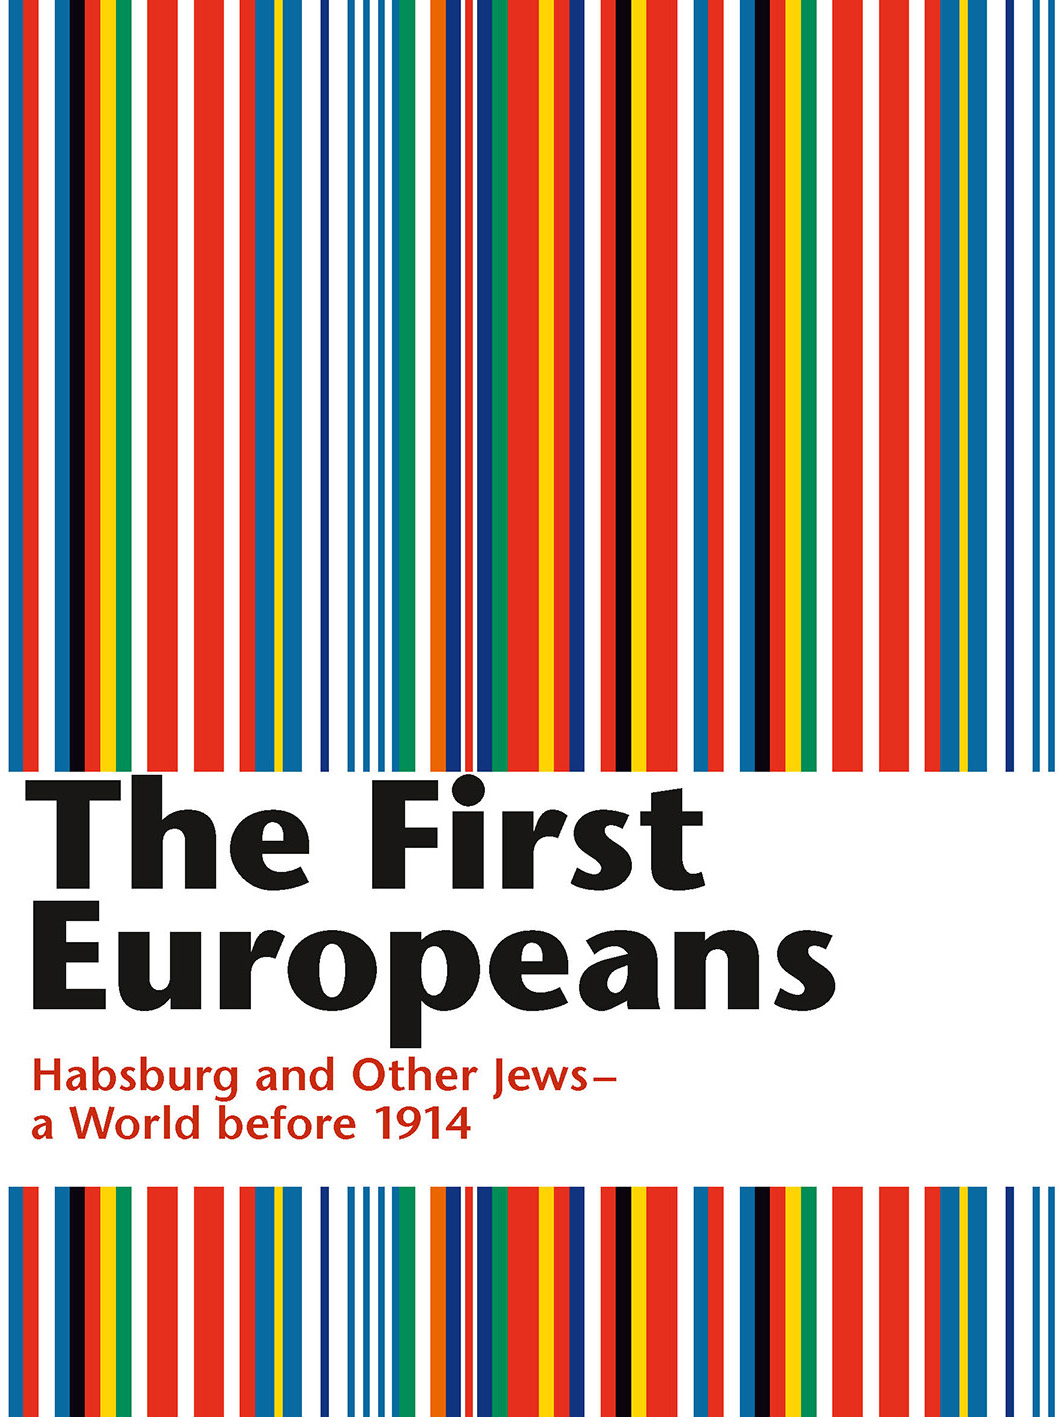 The First Europeans: Habsburg and Other Jews - A World before 1914